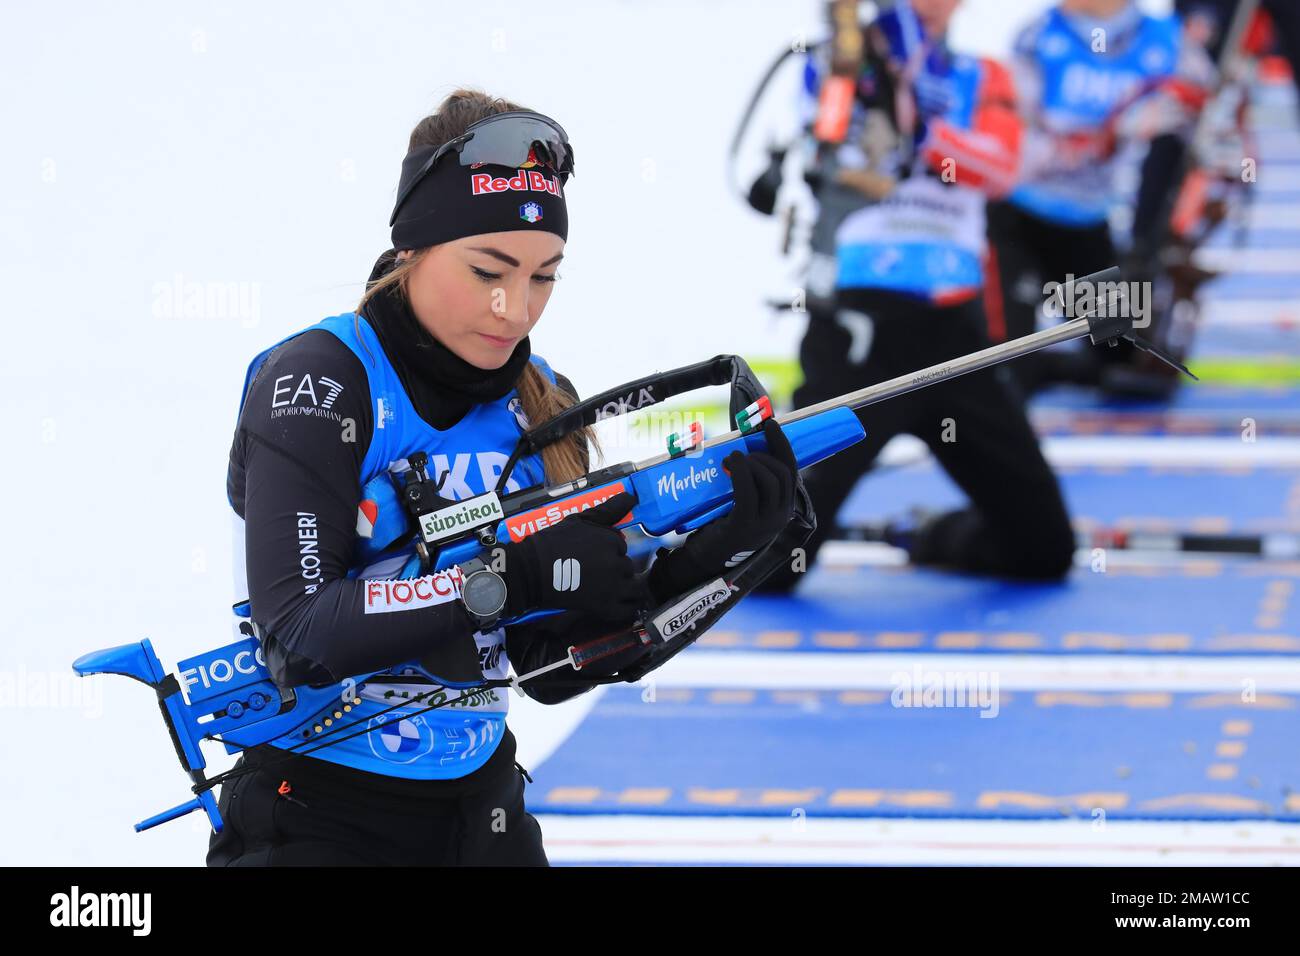 19th January 2023; Antholz - Anterselva, Italy; 2023 IBU Biathlon World Cup, Antholz; Womens sprint event, Dorothea Wierer (ITA) in action